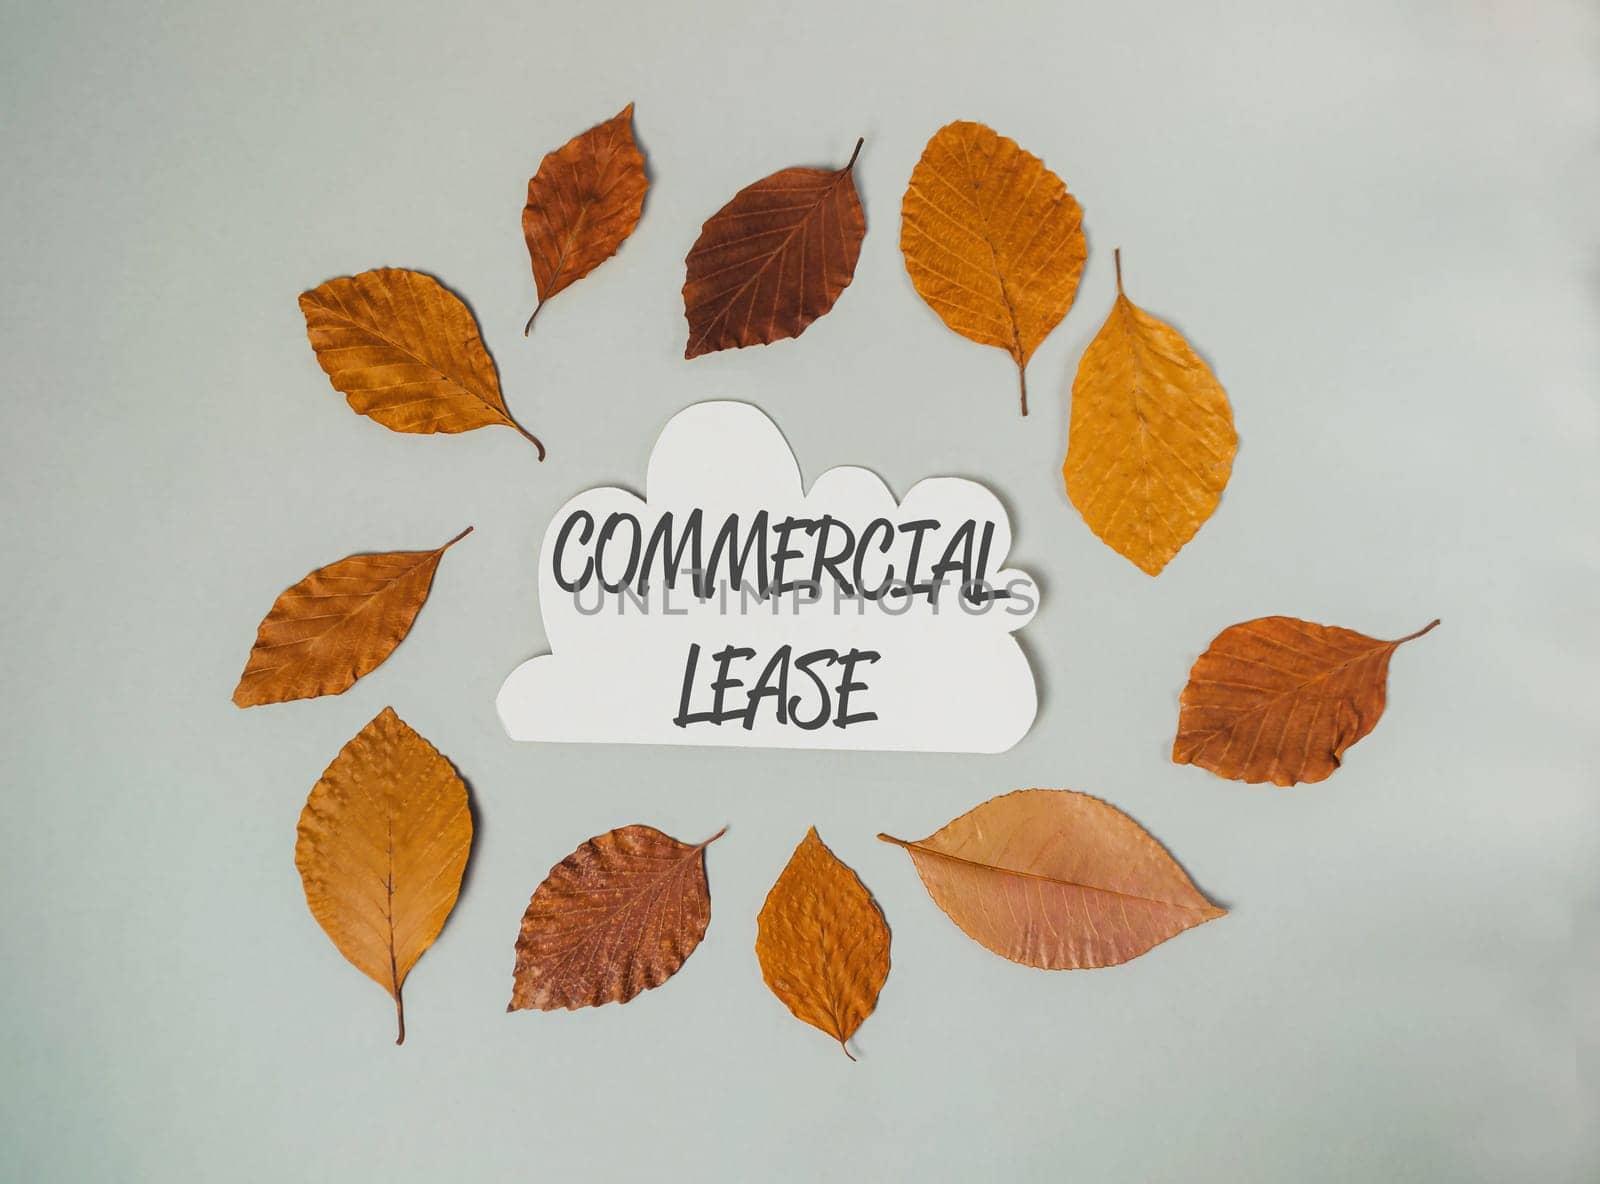 A white sign with the word commercial lease written on it. The sign is surrounded by leaves, which are scattered around the sign. The leaves are of different sizes and colors, creating a natural